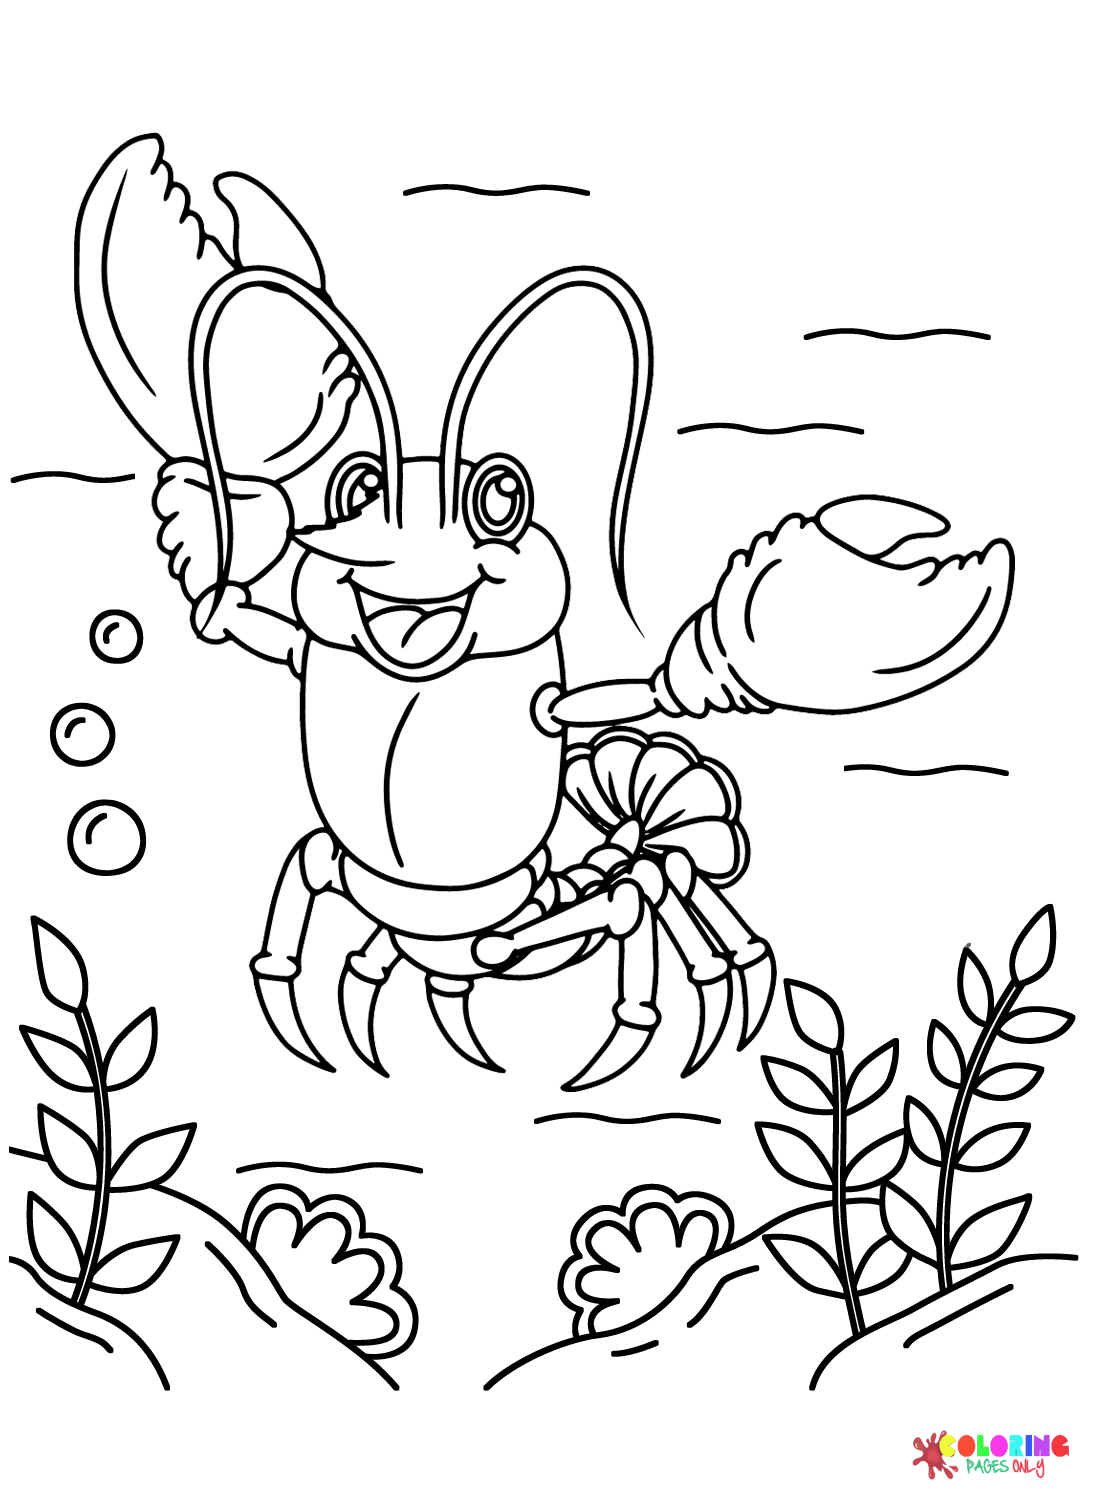 Funny Lobster Coloring Page